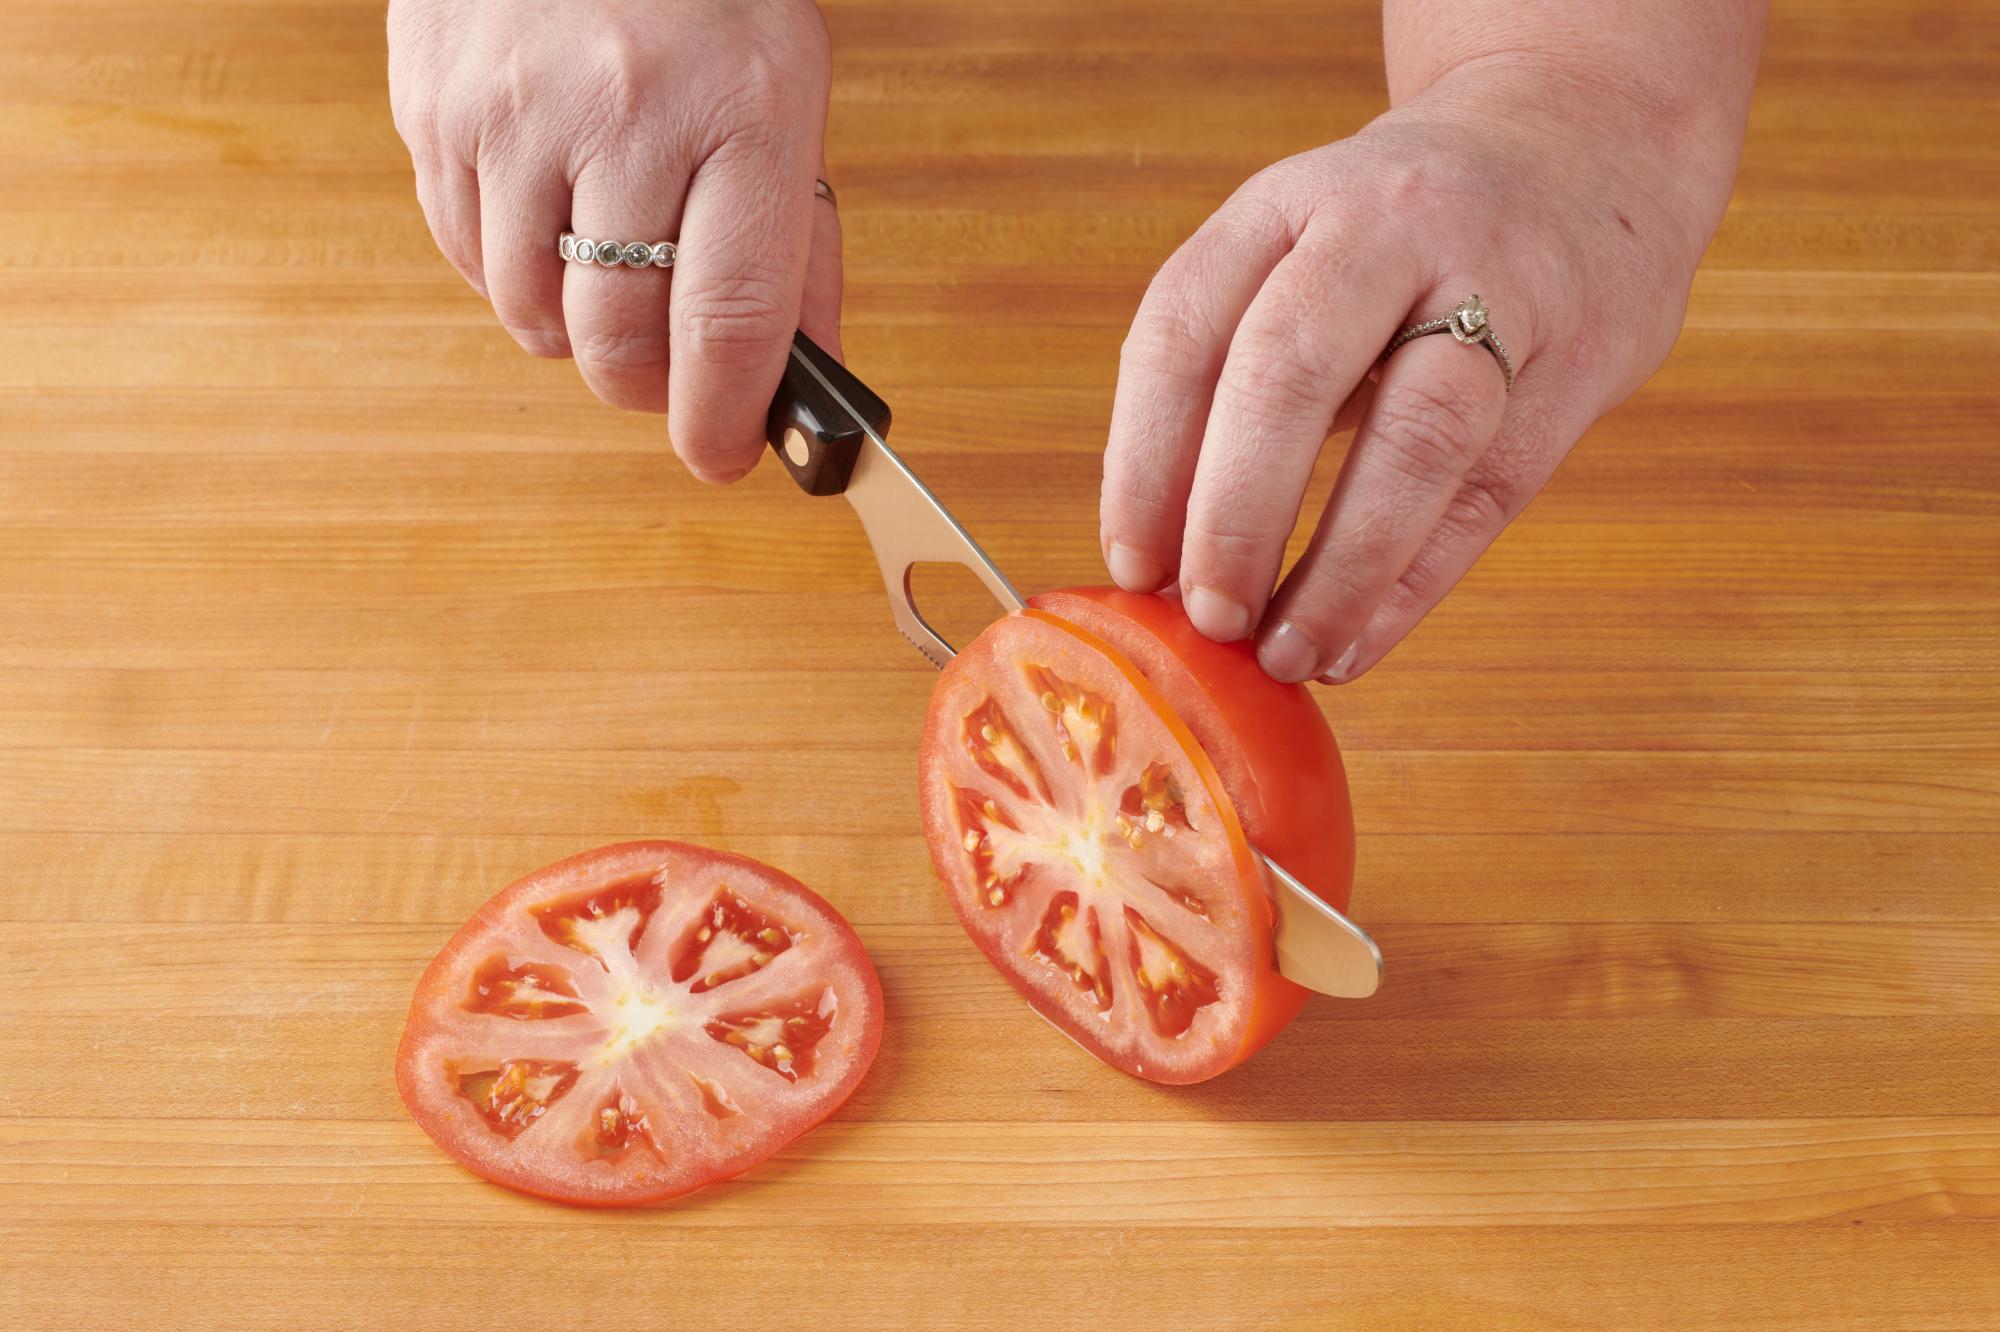 Thinly slicing tomato with a Traditional Cheese Knife.